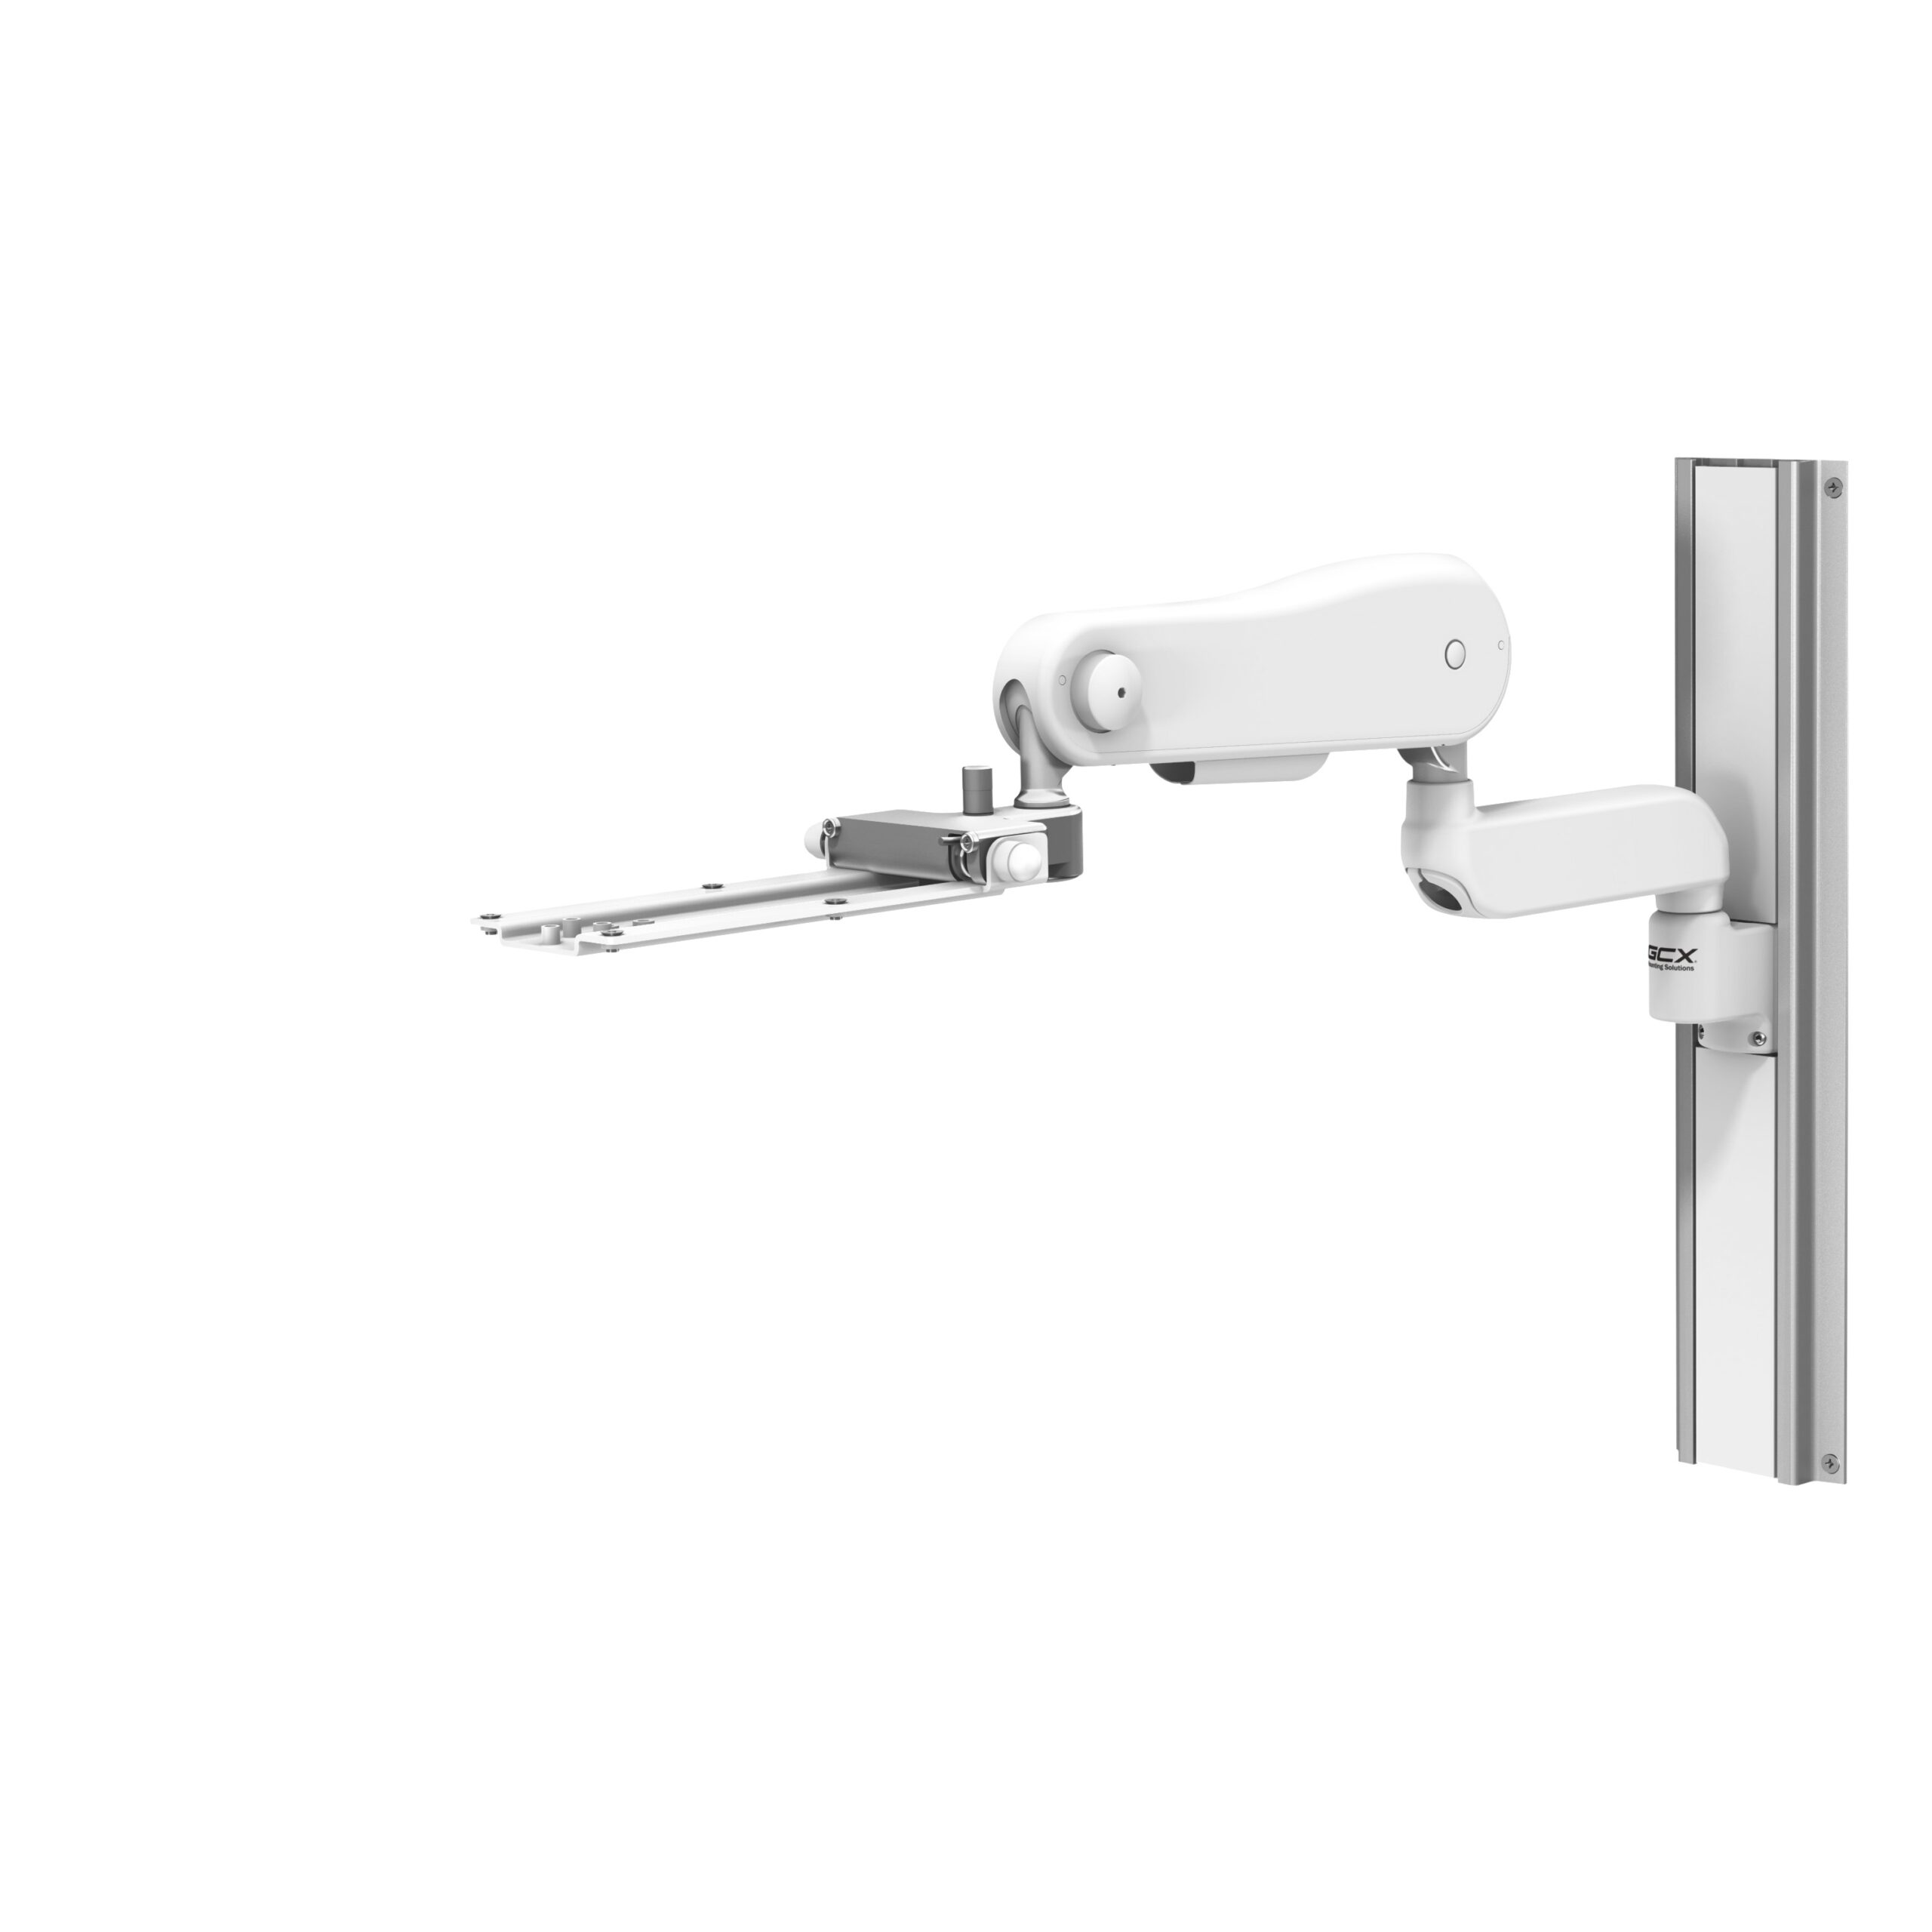 VHM-25™ Variable Height Arm for Keyboard WS-0008-07